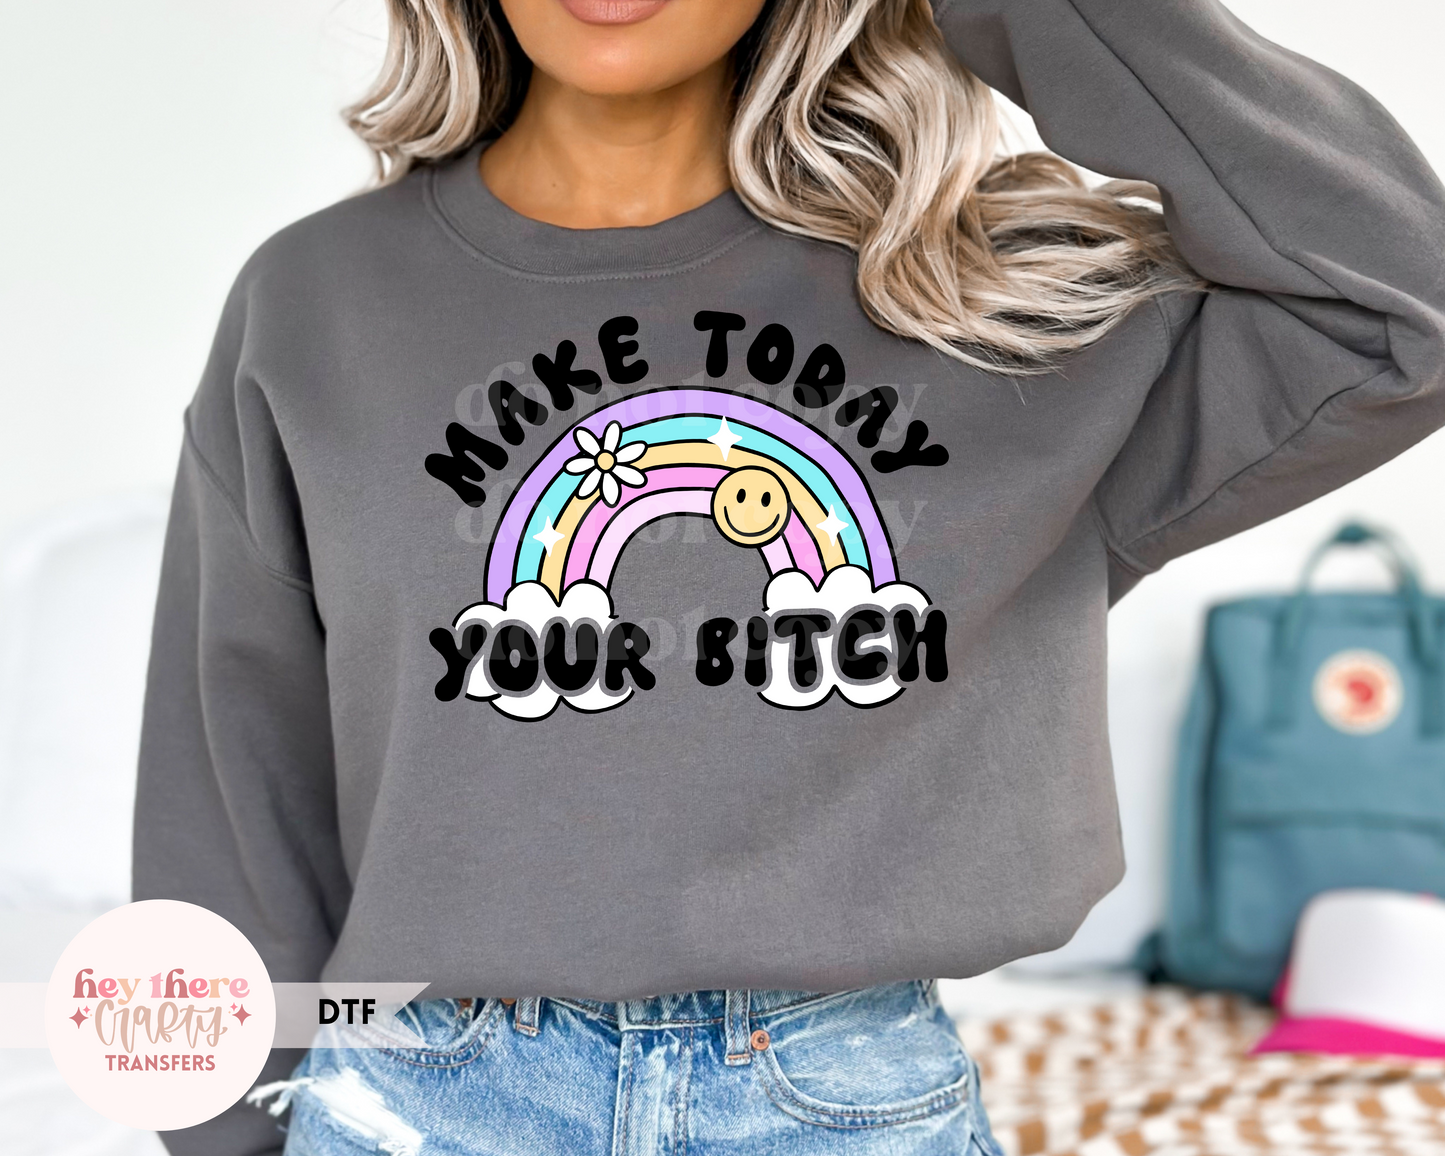 Make Today Your Bitch | DTF Transfer